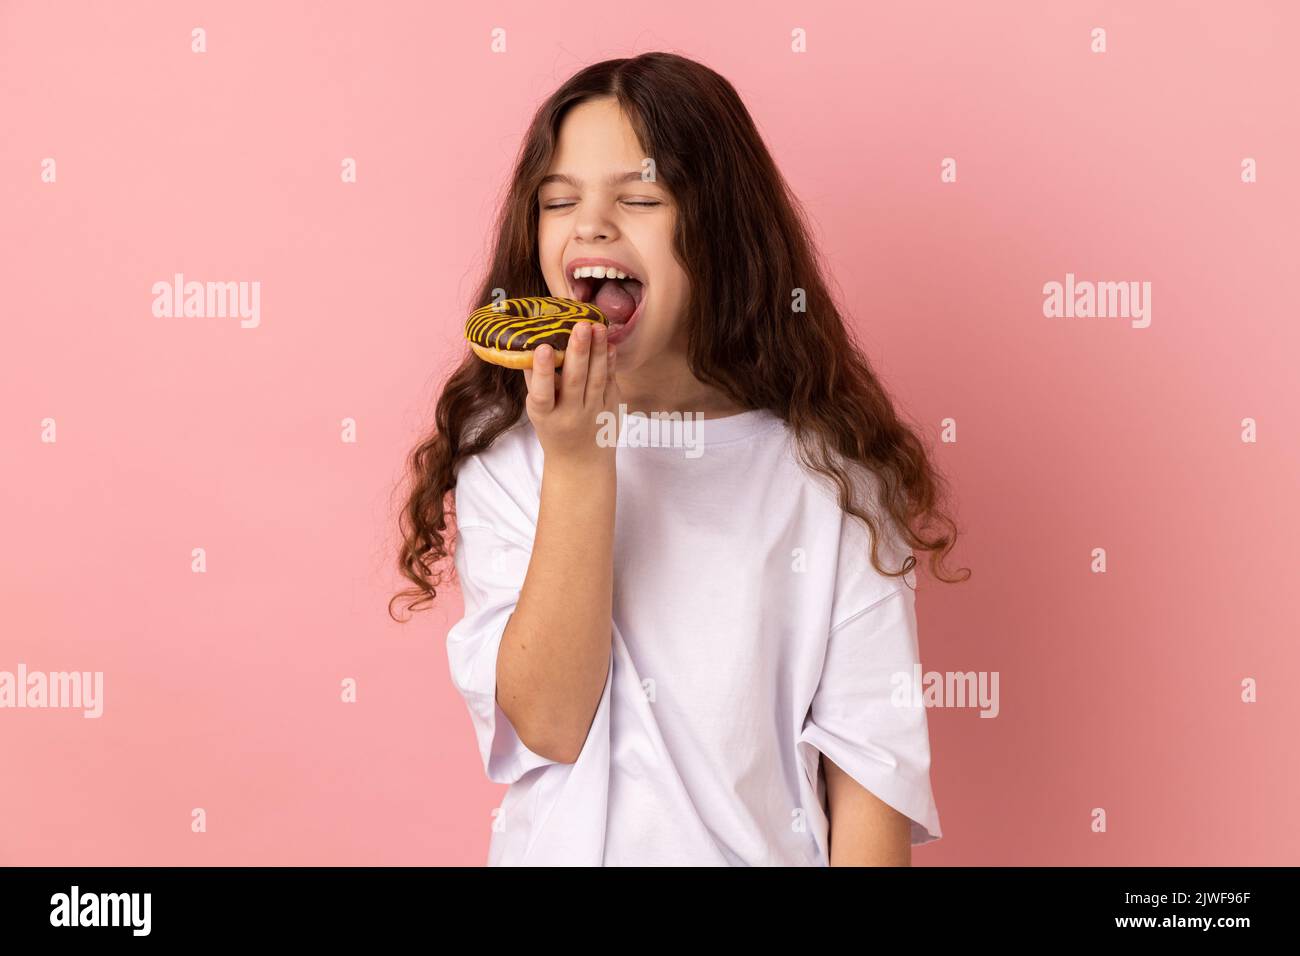 Sugar addiction. Portrait of satisfied little girl wearing white T-shirt biting delicious donut, looking with desire to eat sweet dessert. Indoor studio shot isolated on pink background. Stock Photo